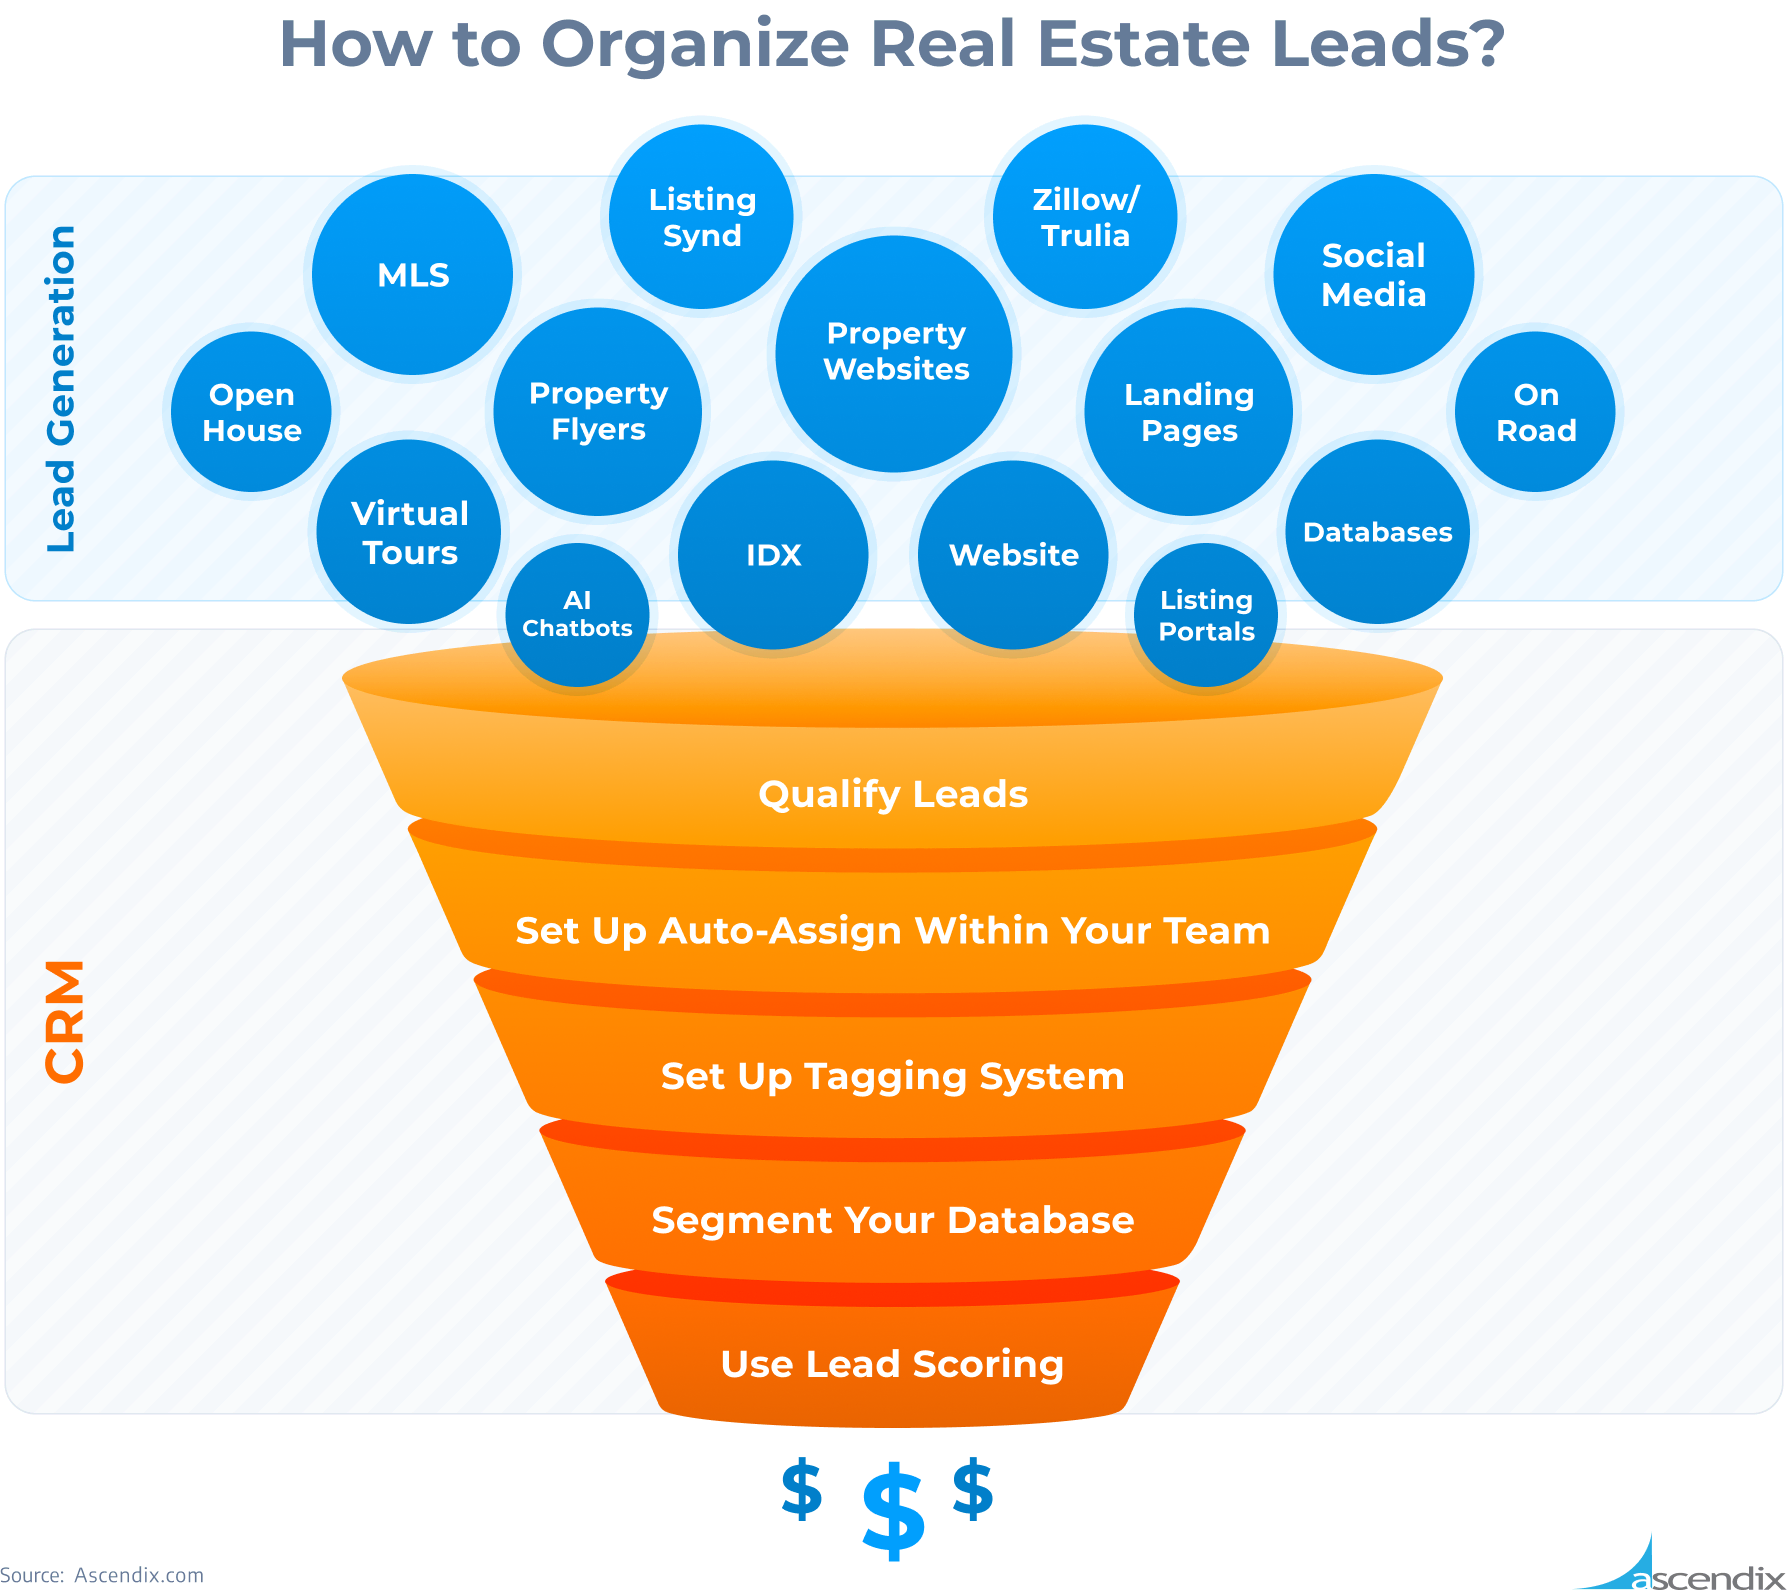 How to Organize Real Estate Leads | Ascendix